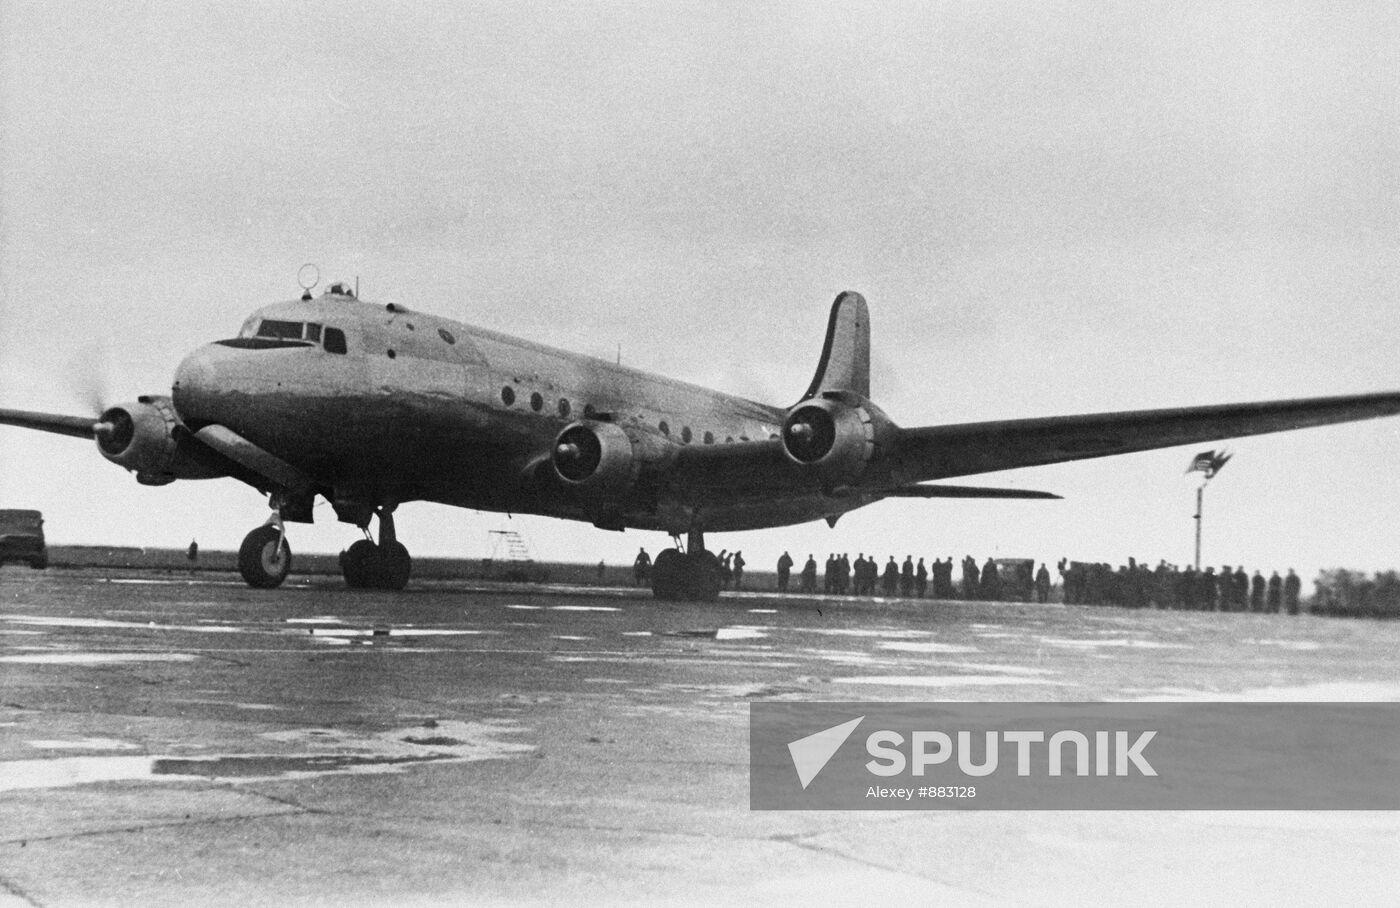 An aircraft at Simferopol airfield in February 1945